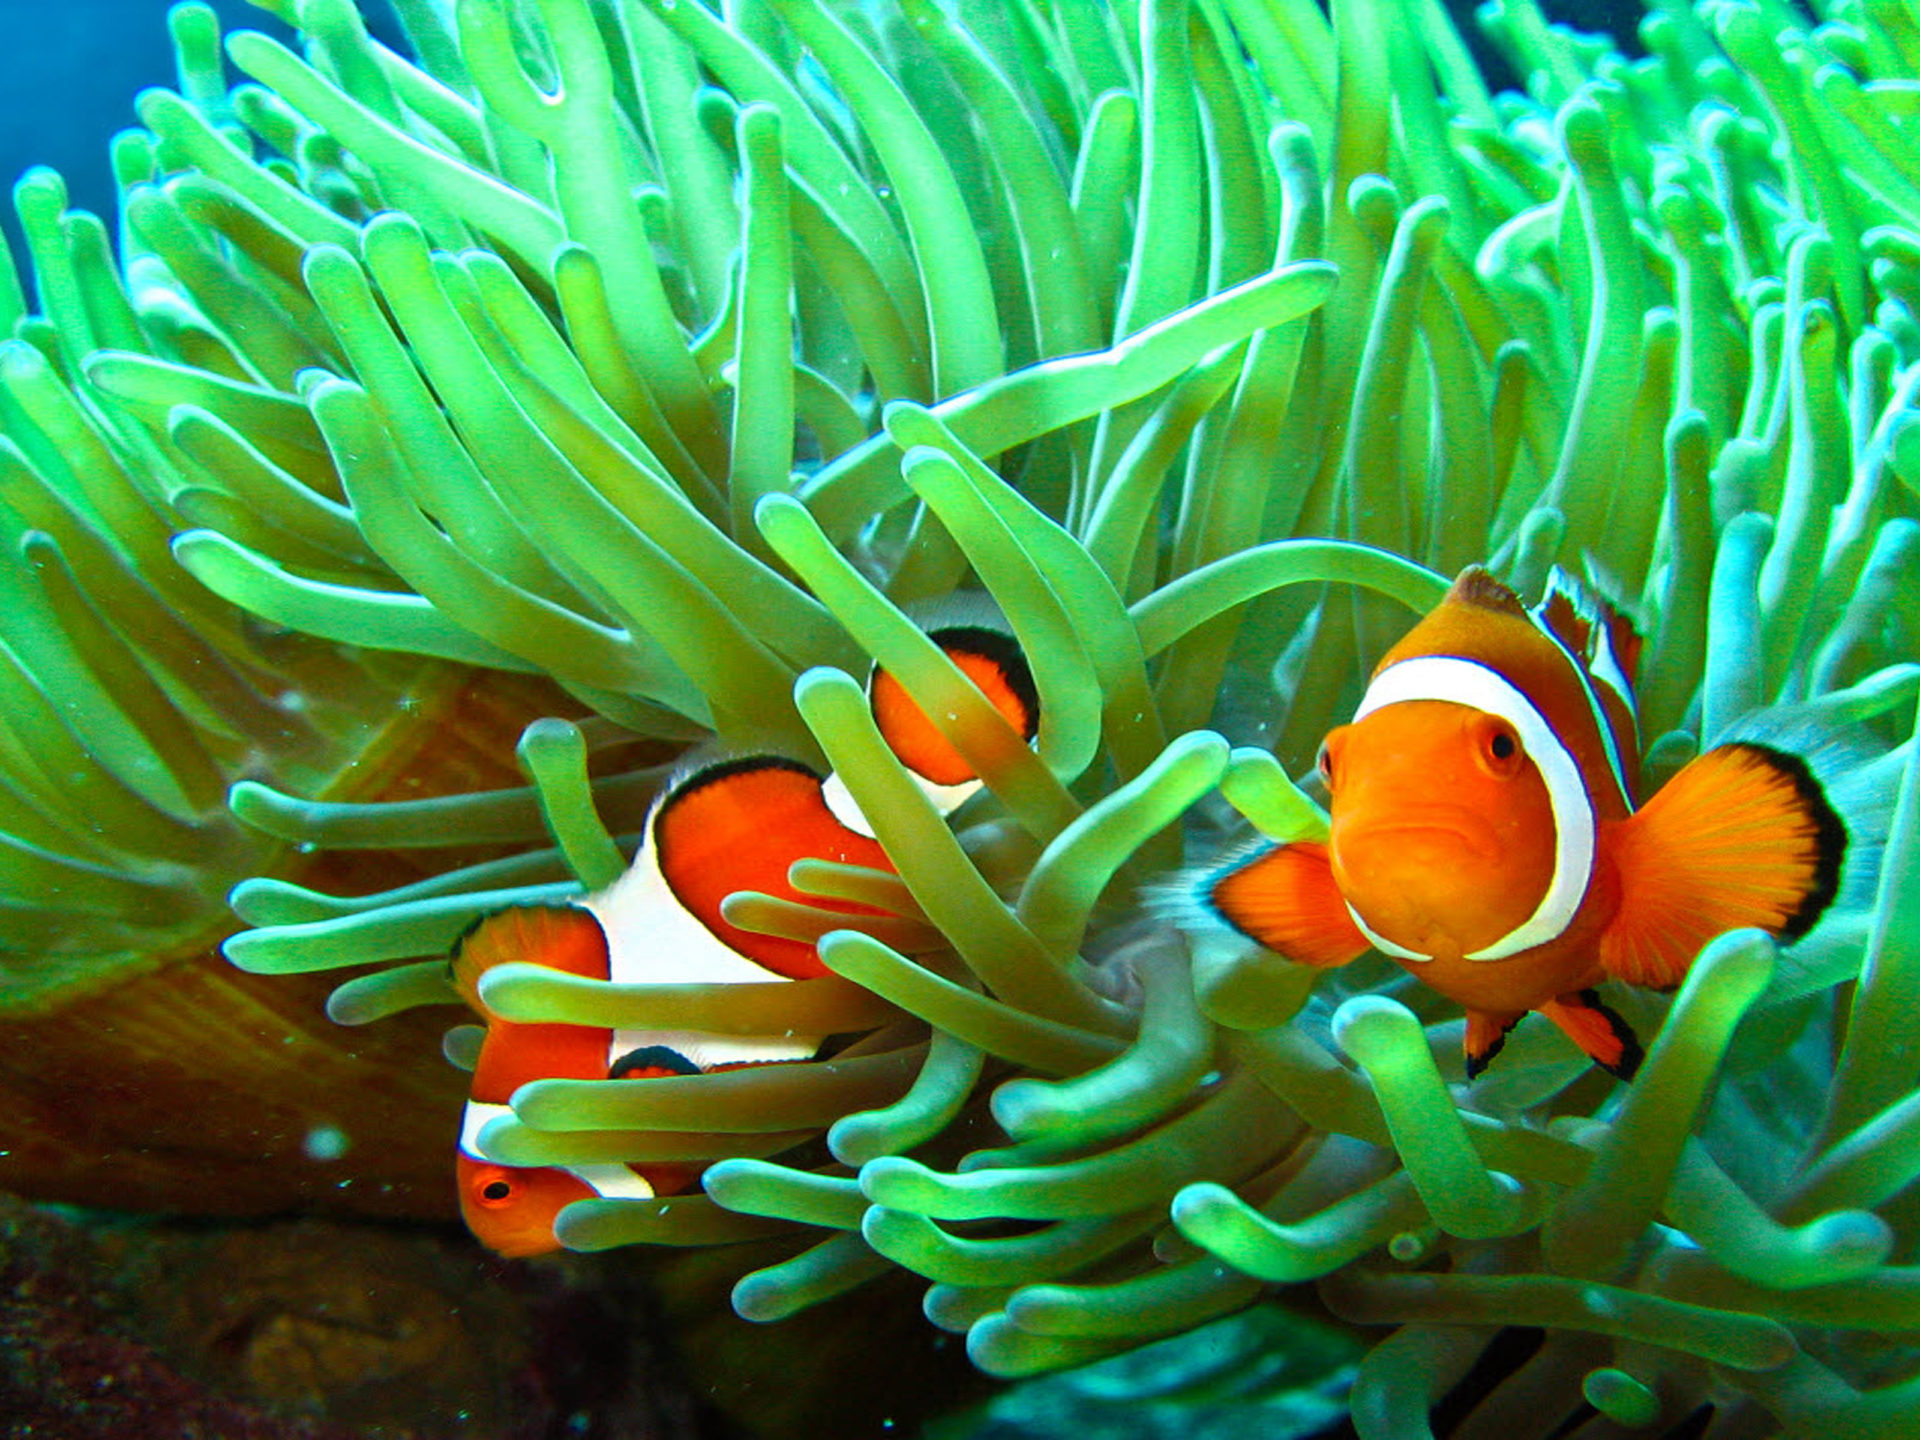 Clownfish and anemone, Sea animal connection, HD delight, Stunning underwater wallpapers, 1920x1440 HD Desktop